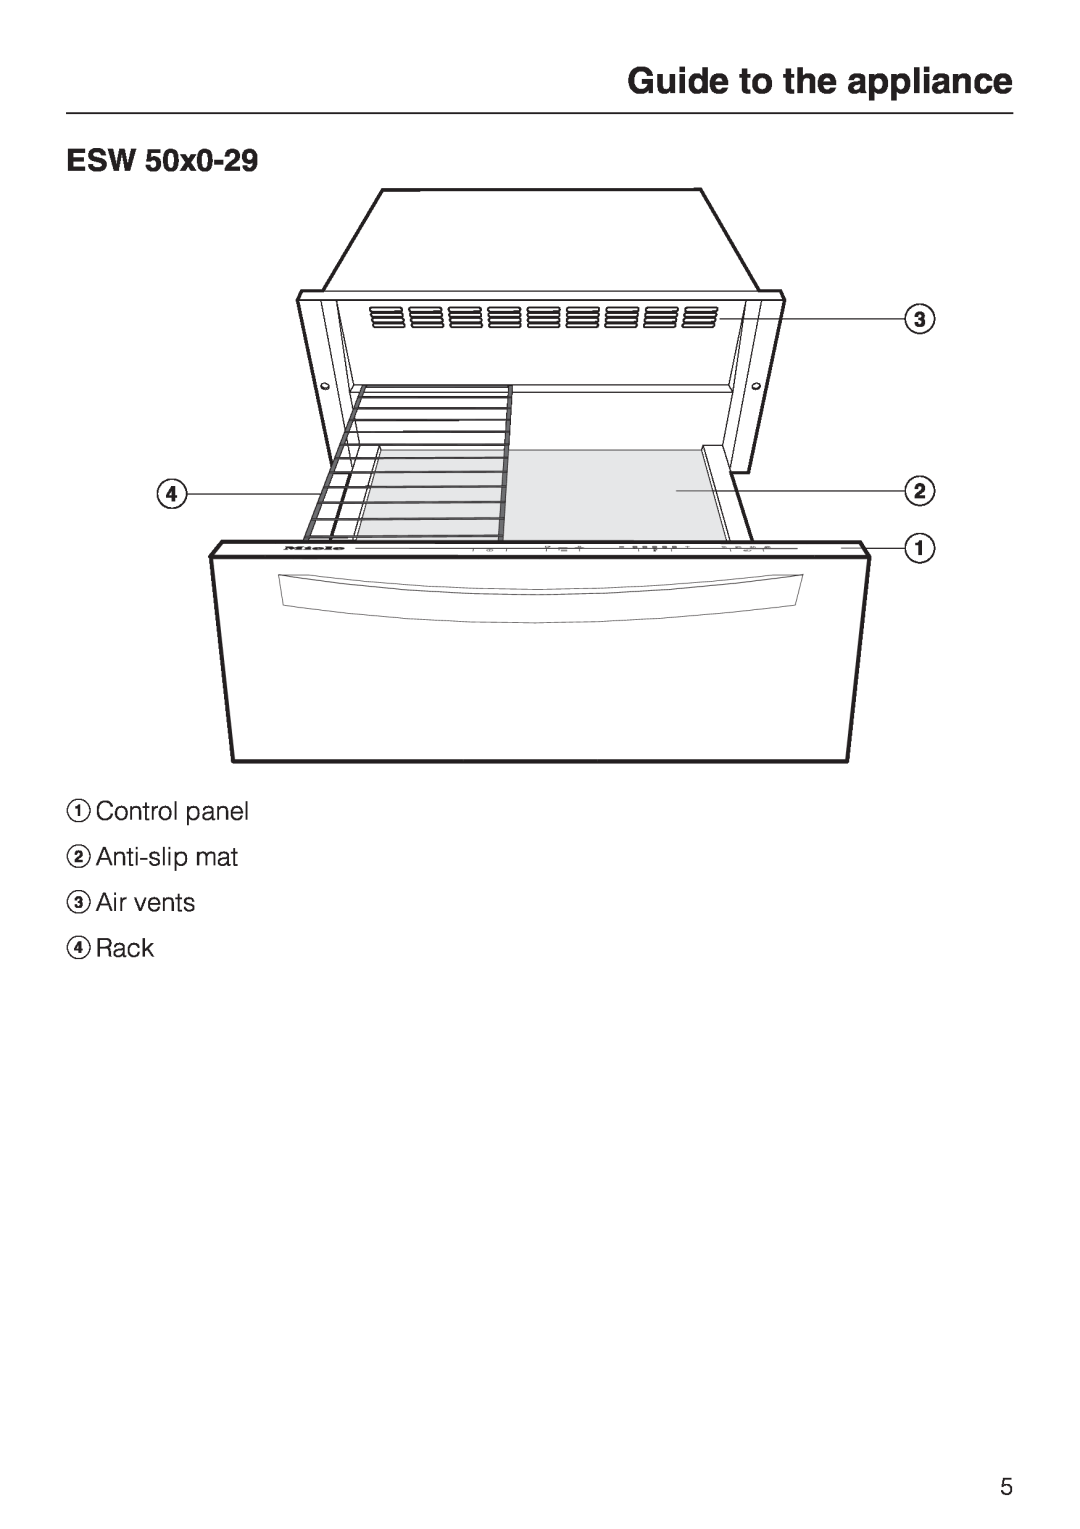 Miele ESW 50X0-29, ESW 50X0-14, ESW 5088-14 Guide to the appliance, a Control panel b Anti-slip mat c Air vents d Rack 